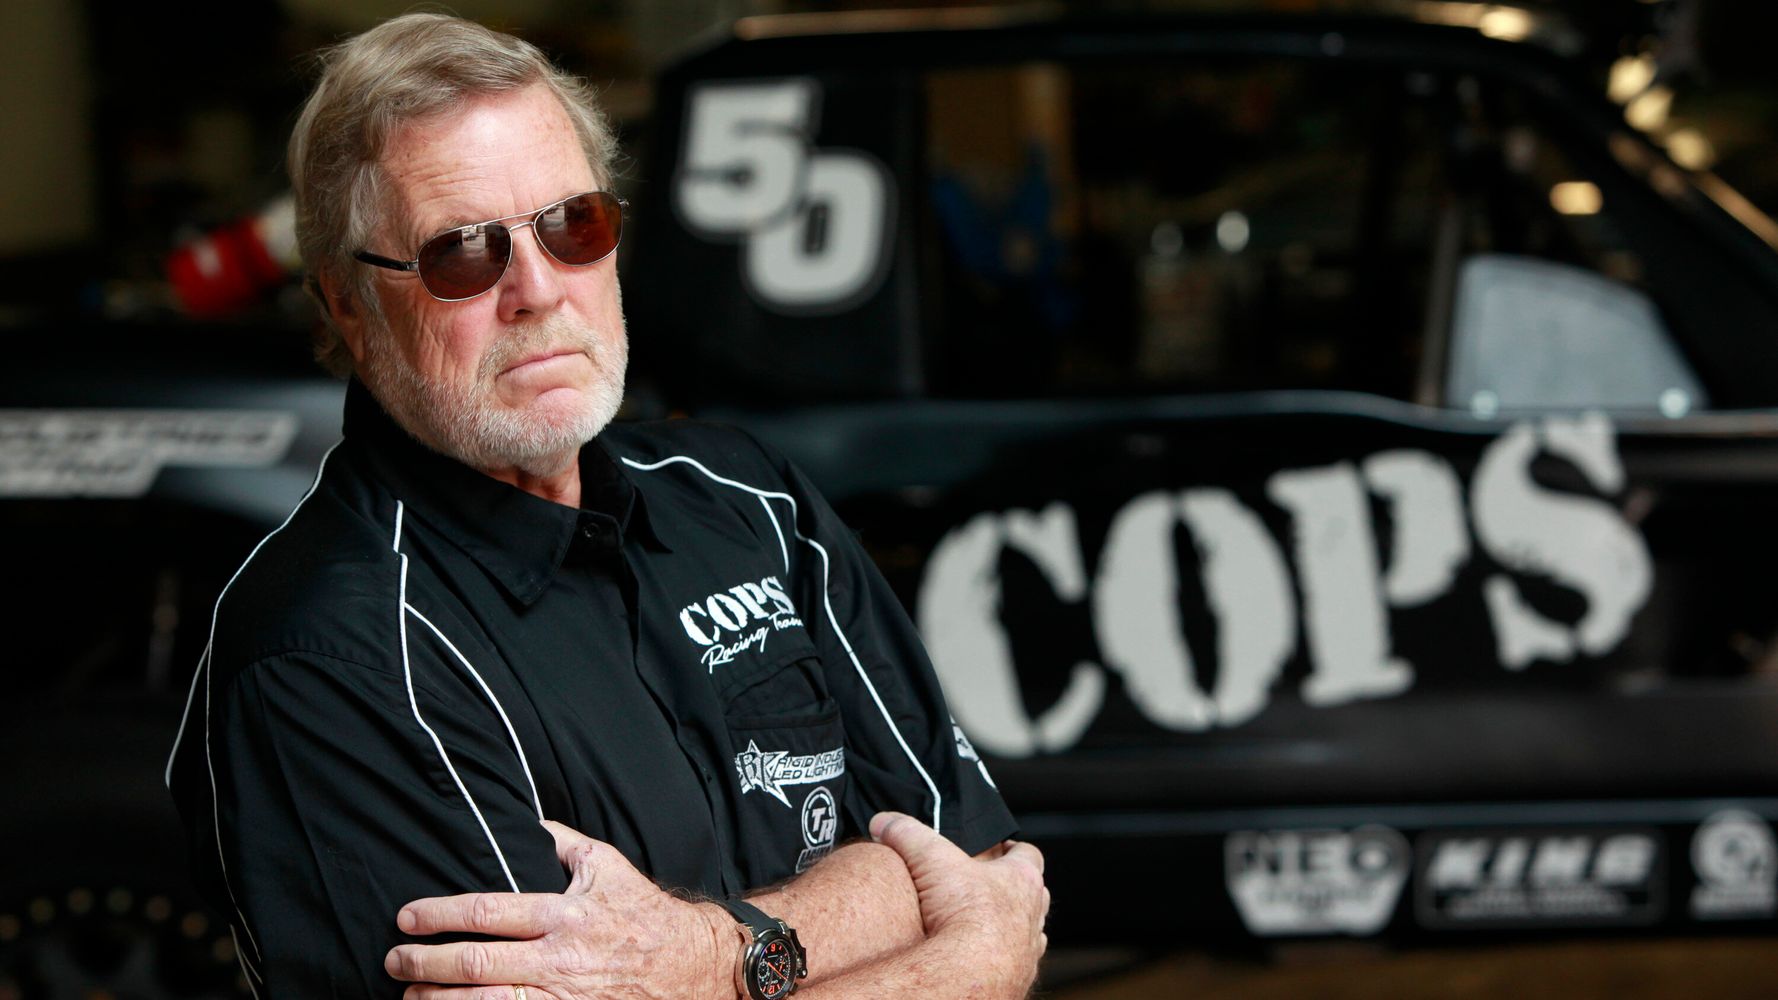 John Langley, Creator Of Reality TV Show 'Cops,' Dead At 78